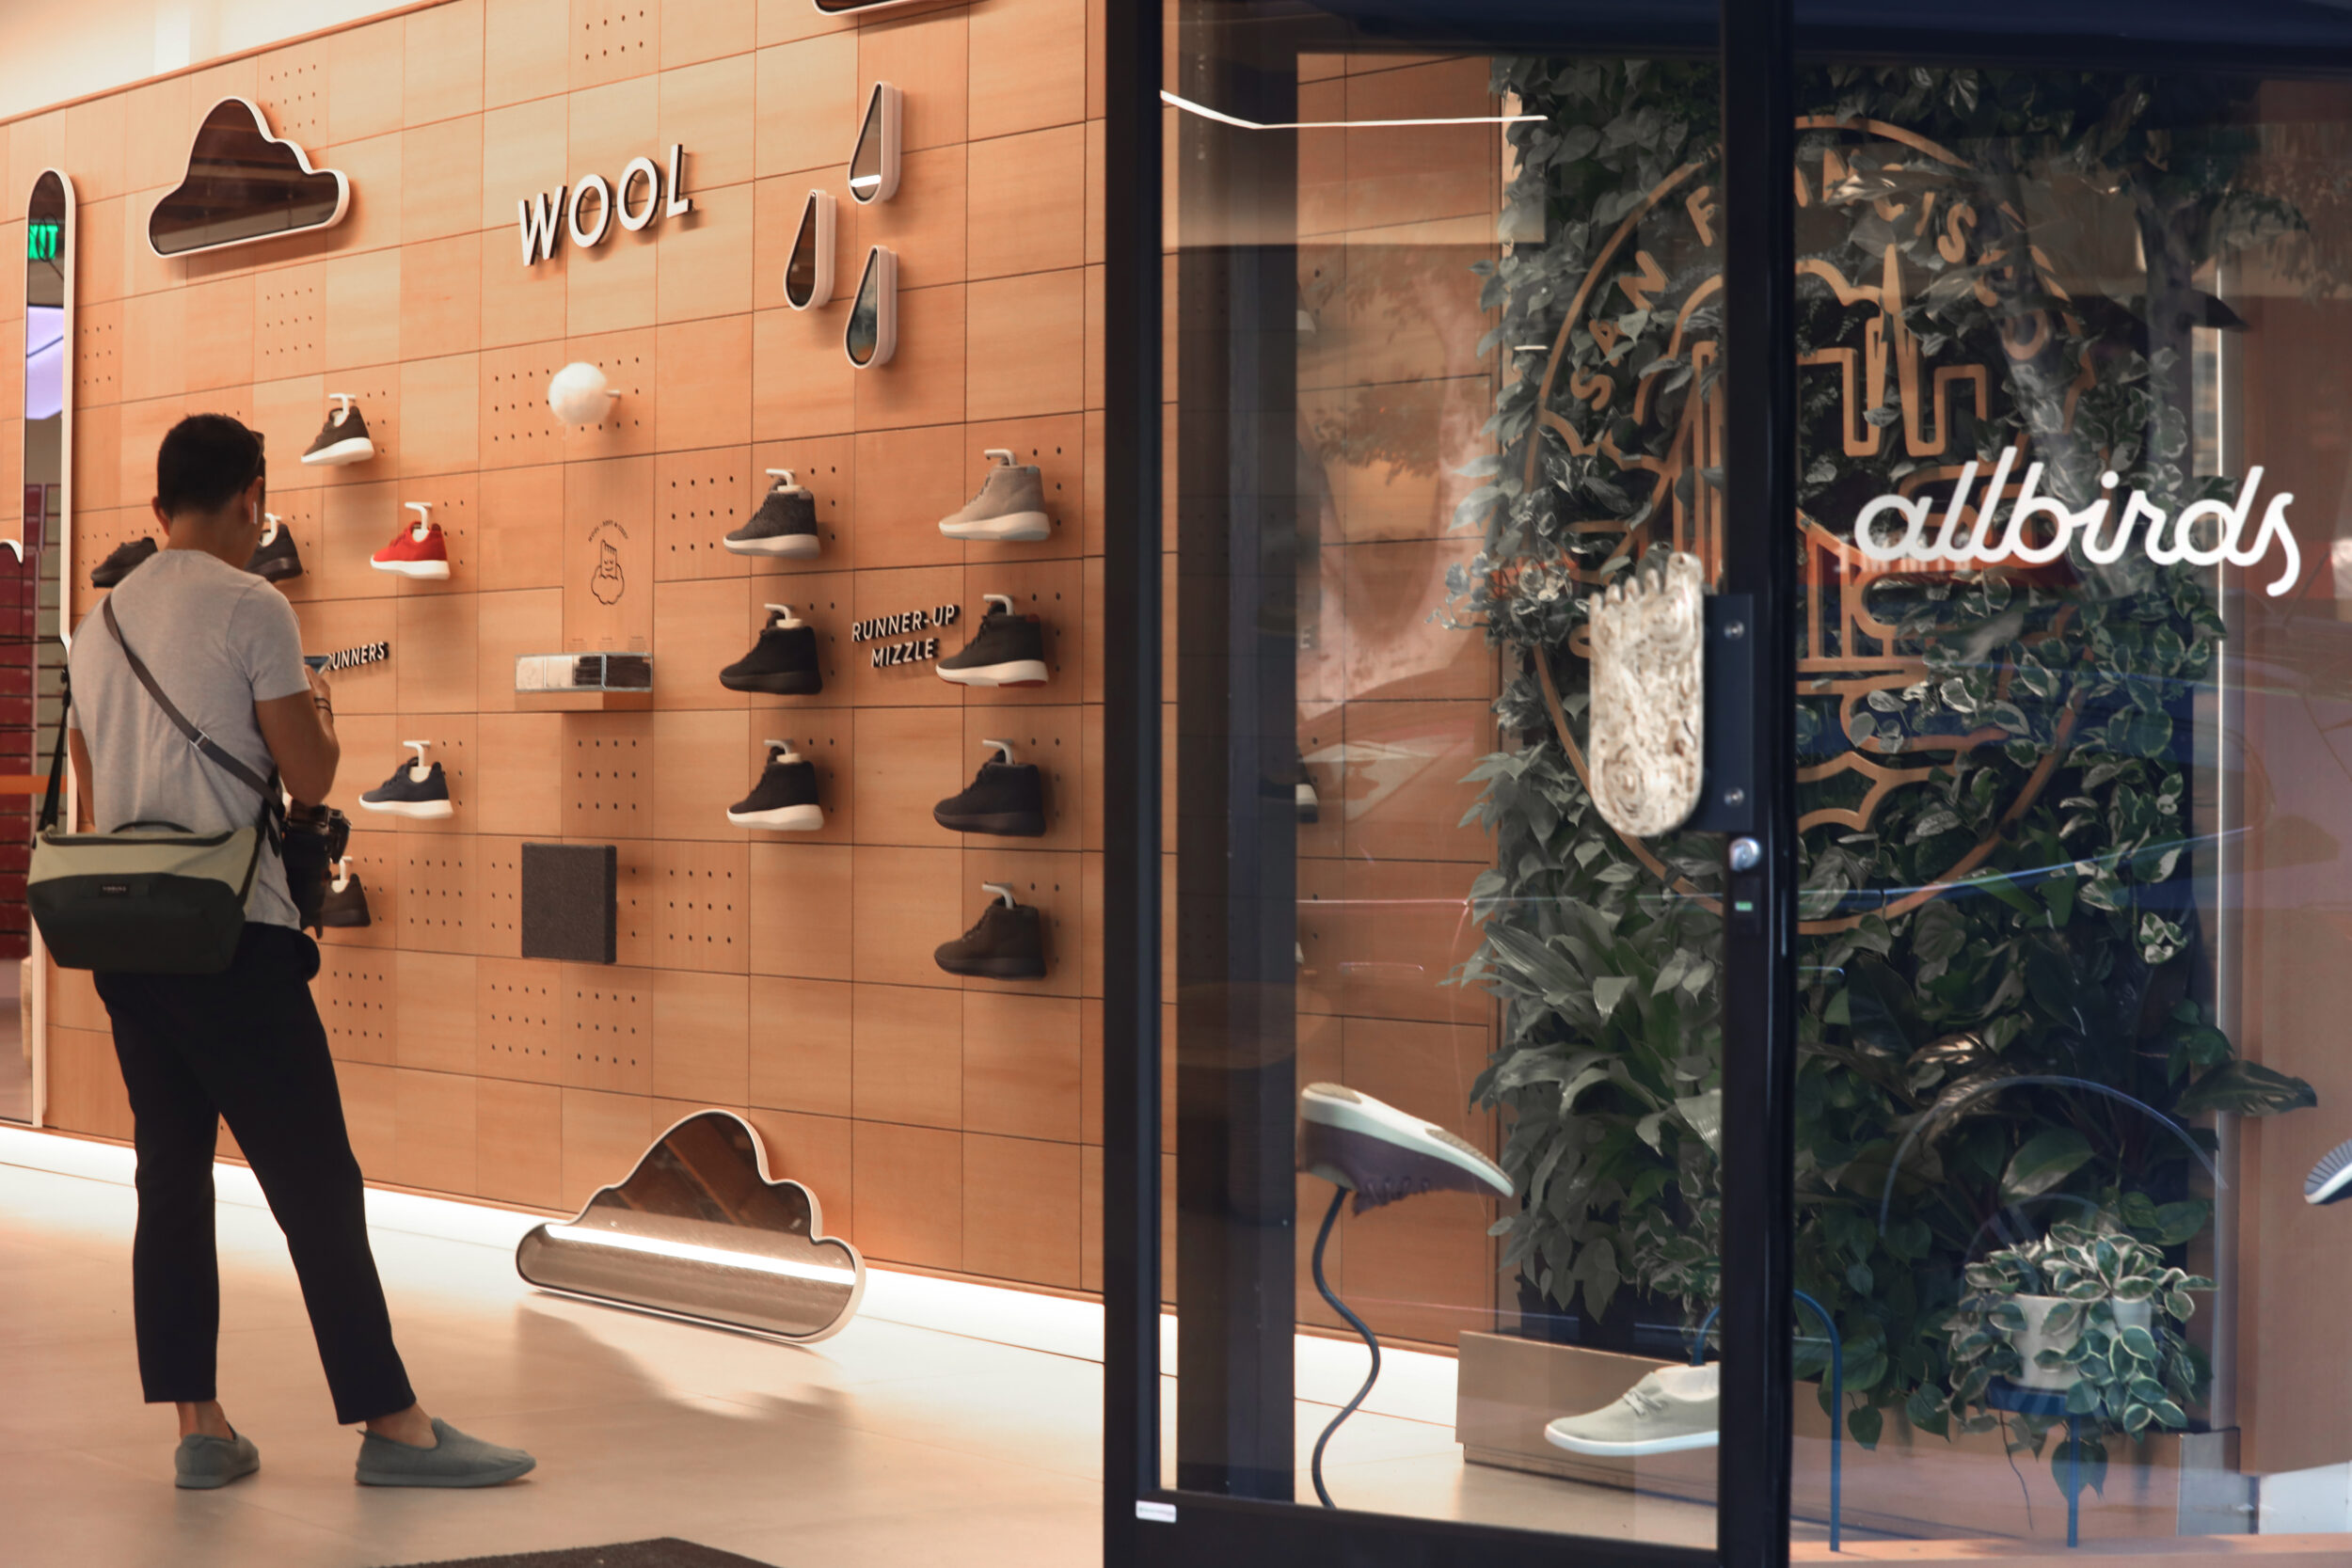 A person examines a shoe display inside an Allbirds store with a wood-inspired decor and greenery.